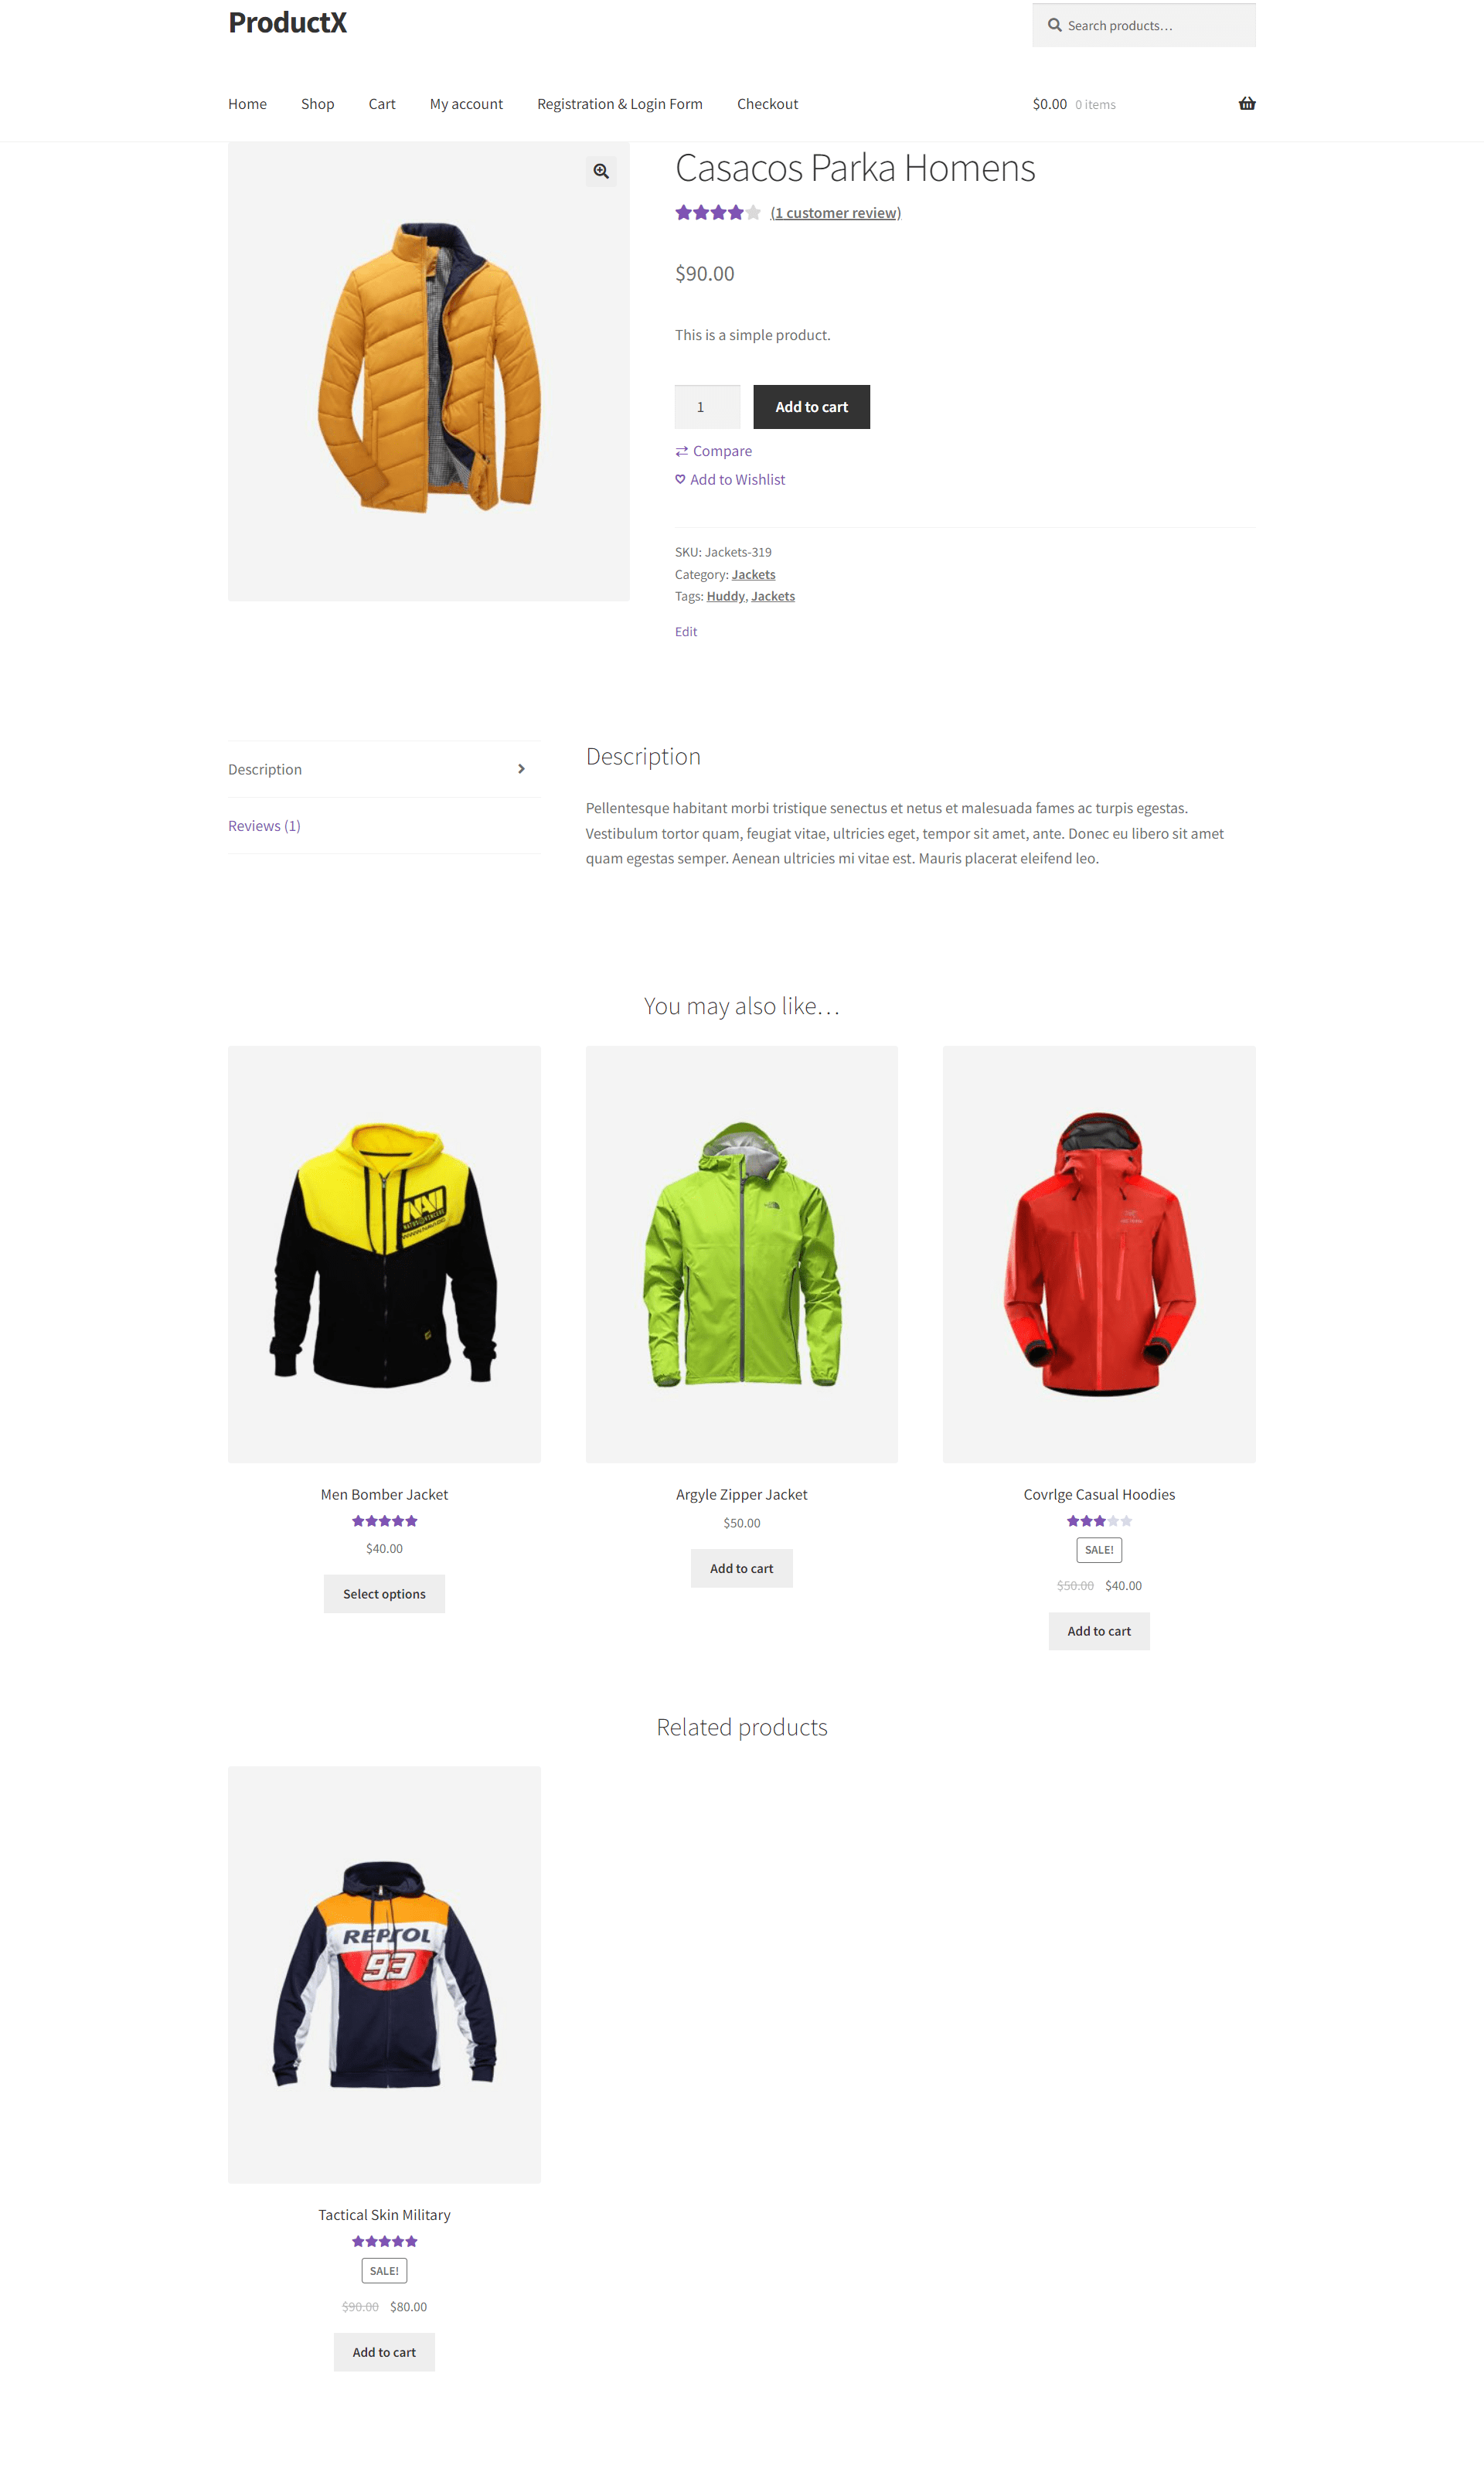 display upsell items on product page-min